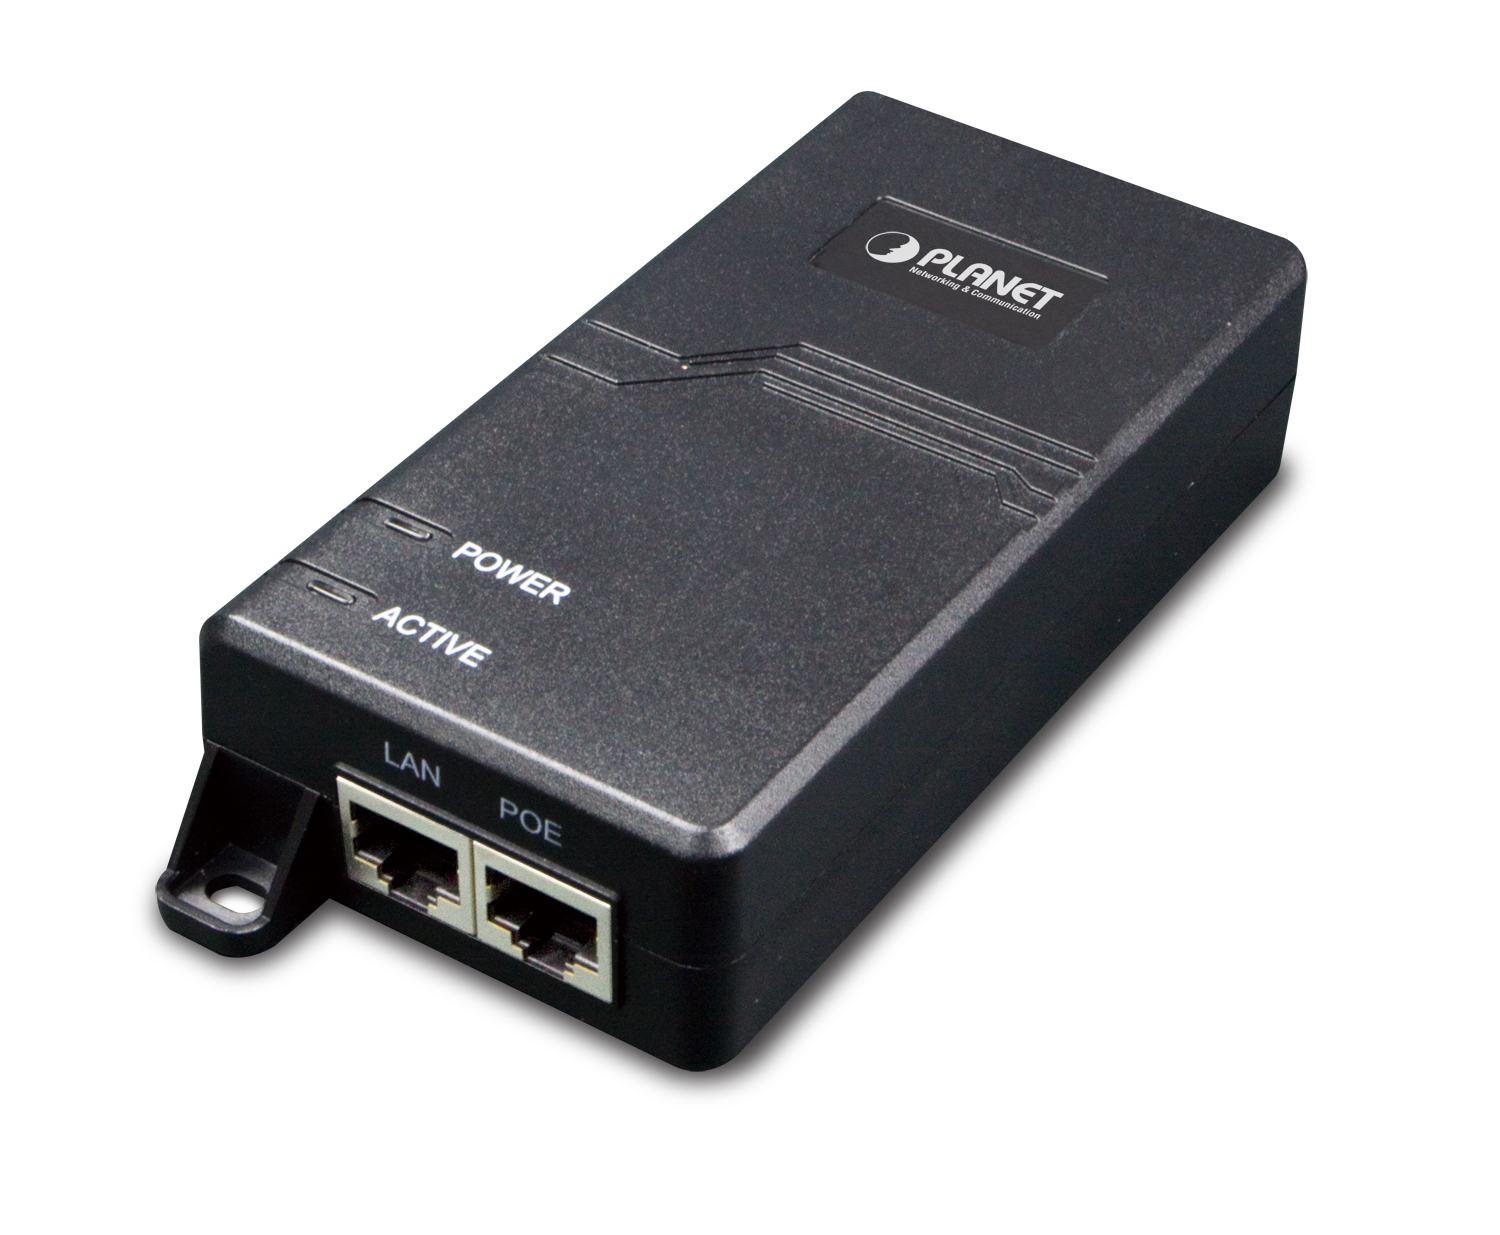 POE-163-UK PLANET IEEE802.3at High Power PoE+ Gigabit Ethernet Injector 30W (All-in-one Pack)